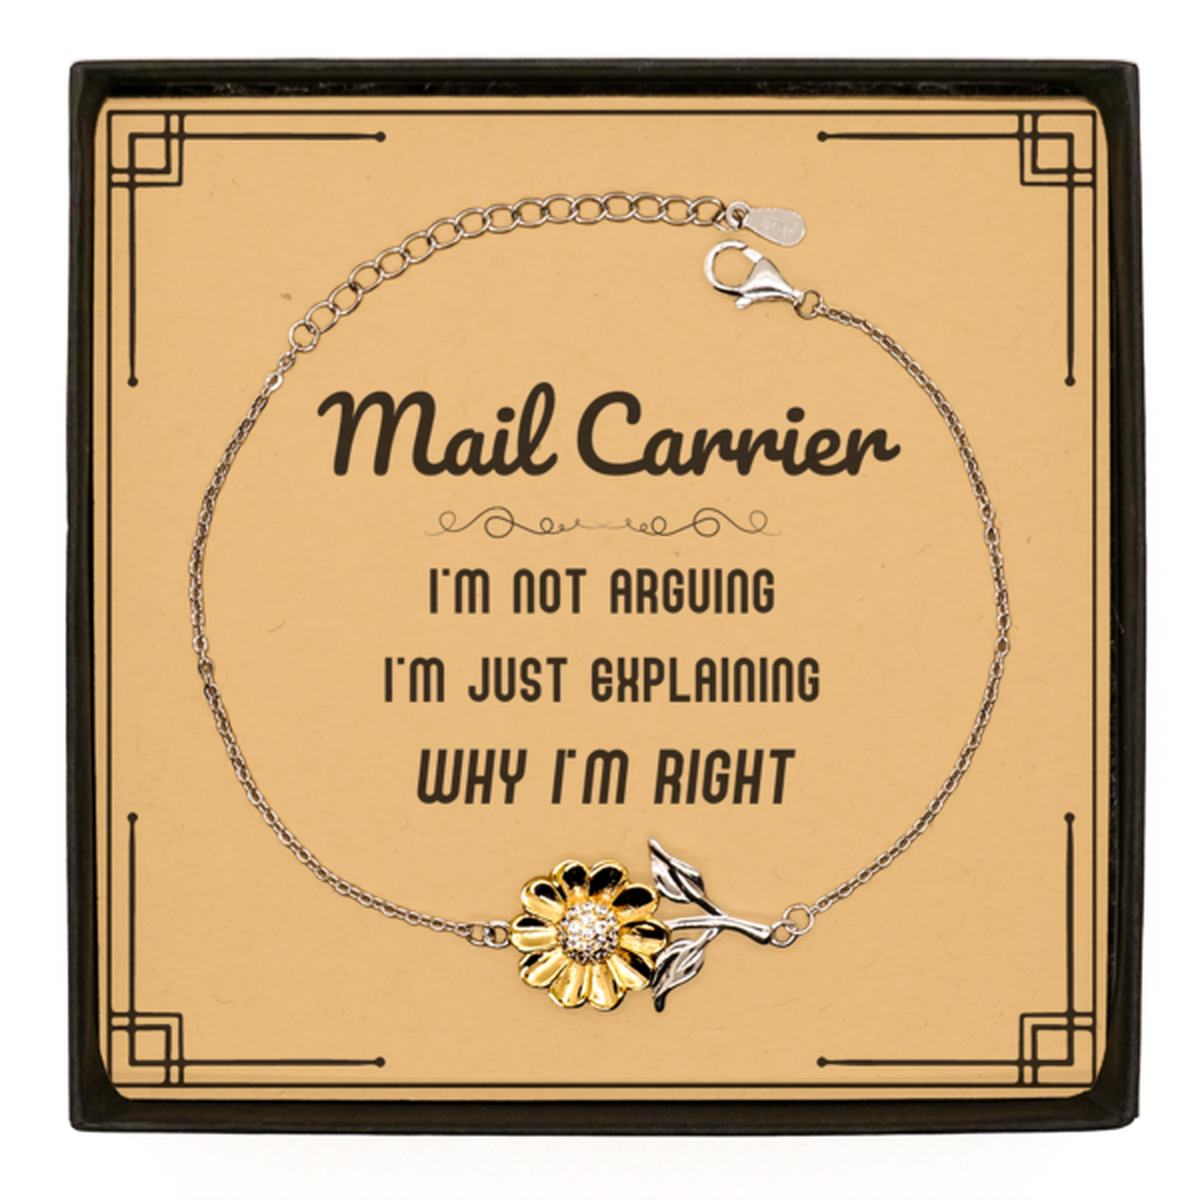 Mail Carrier I'm not Arguing. I'm Just Explaining Why I'm RIGHT Sunflower Bracelet, Funny Saying Quote Mail Carrier Gifts For Mail Carrier Message Card Graduation Birthday Christmas Gifts for Men Women Coworker